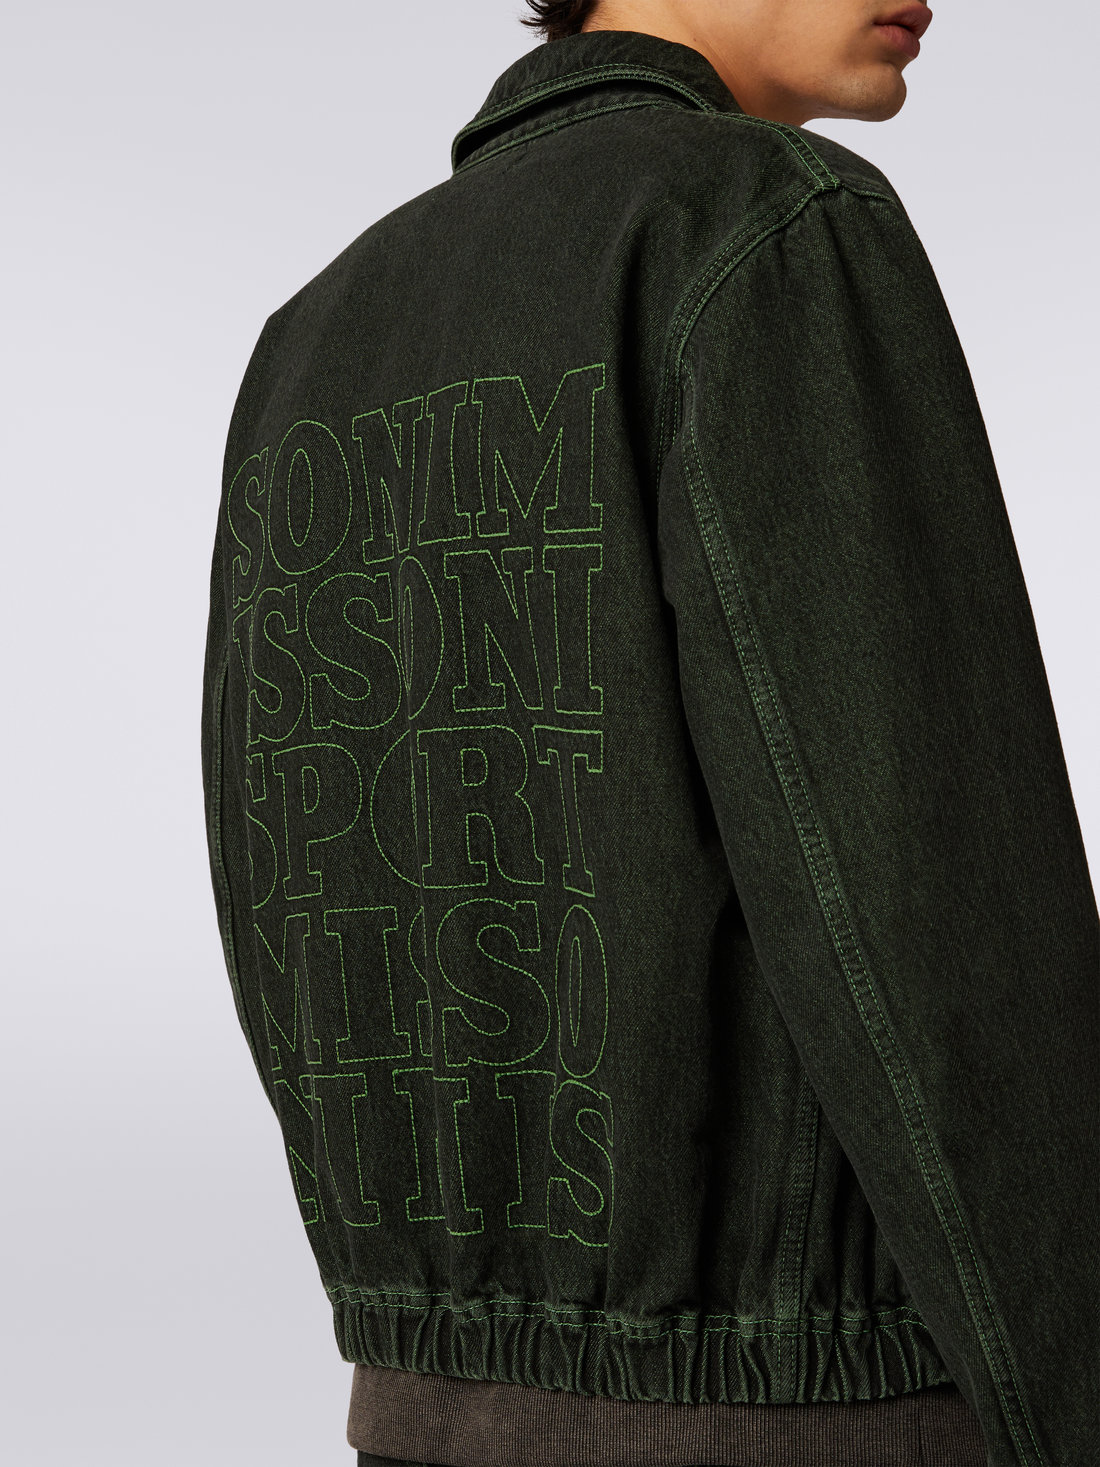 Denim jacket with embroidered logo, Green - TS23WC07BW00OMS611S - 4